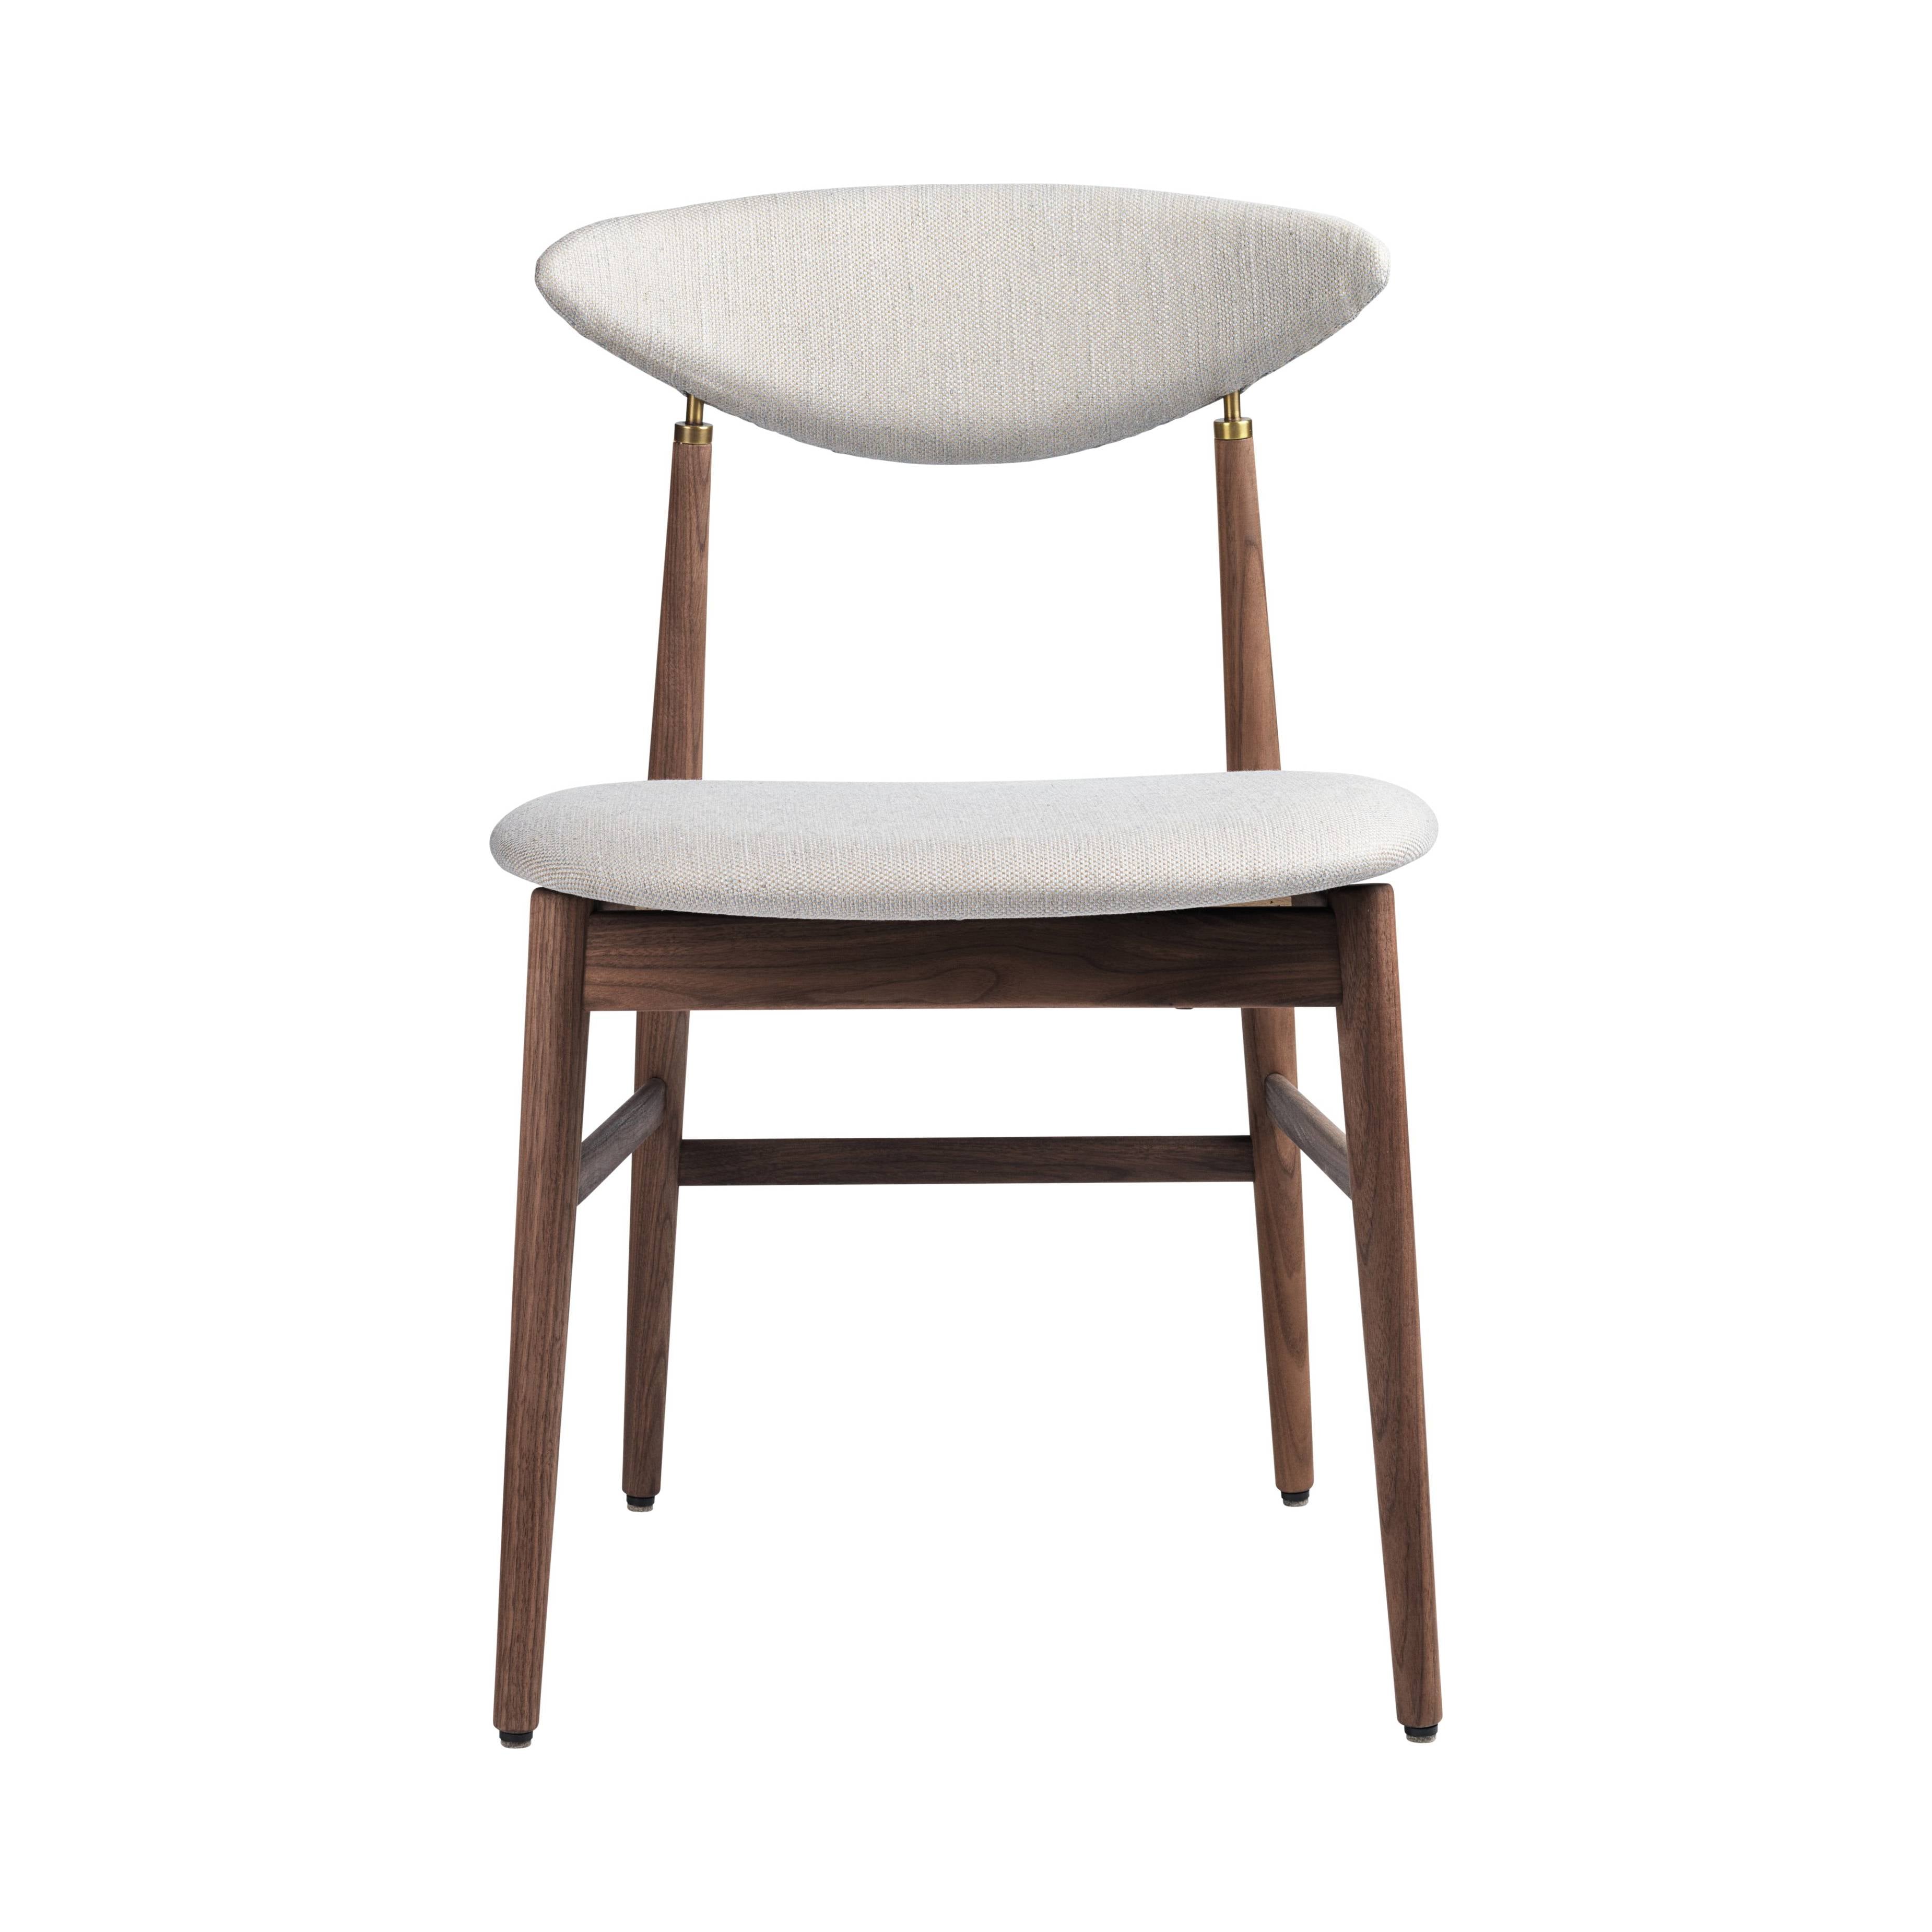 Gent Dining Chair: Wood Base + Fully Upholstered + American Walnut